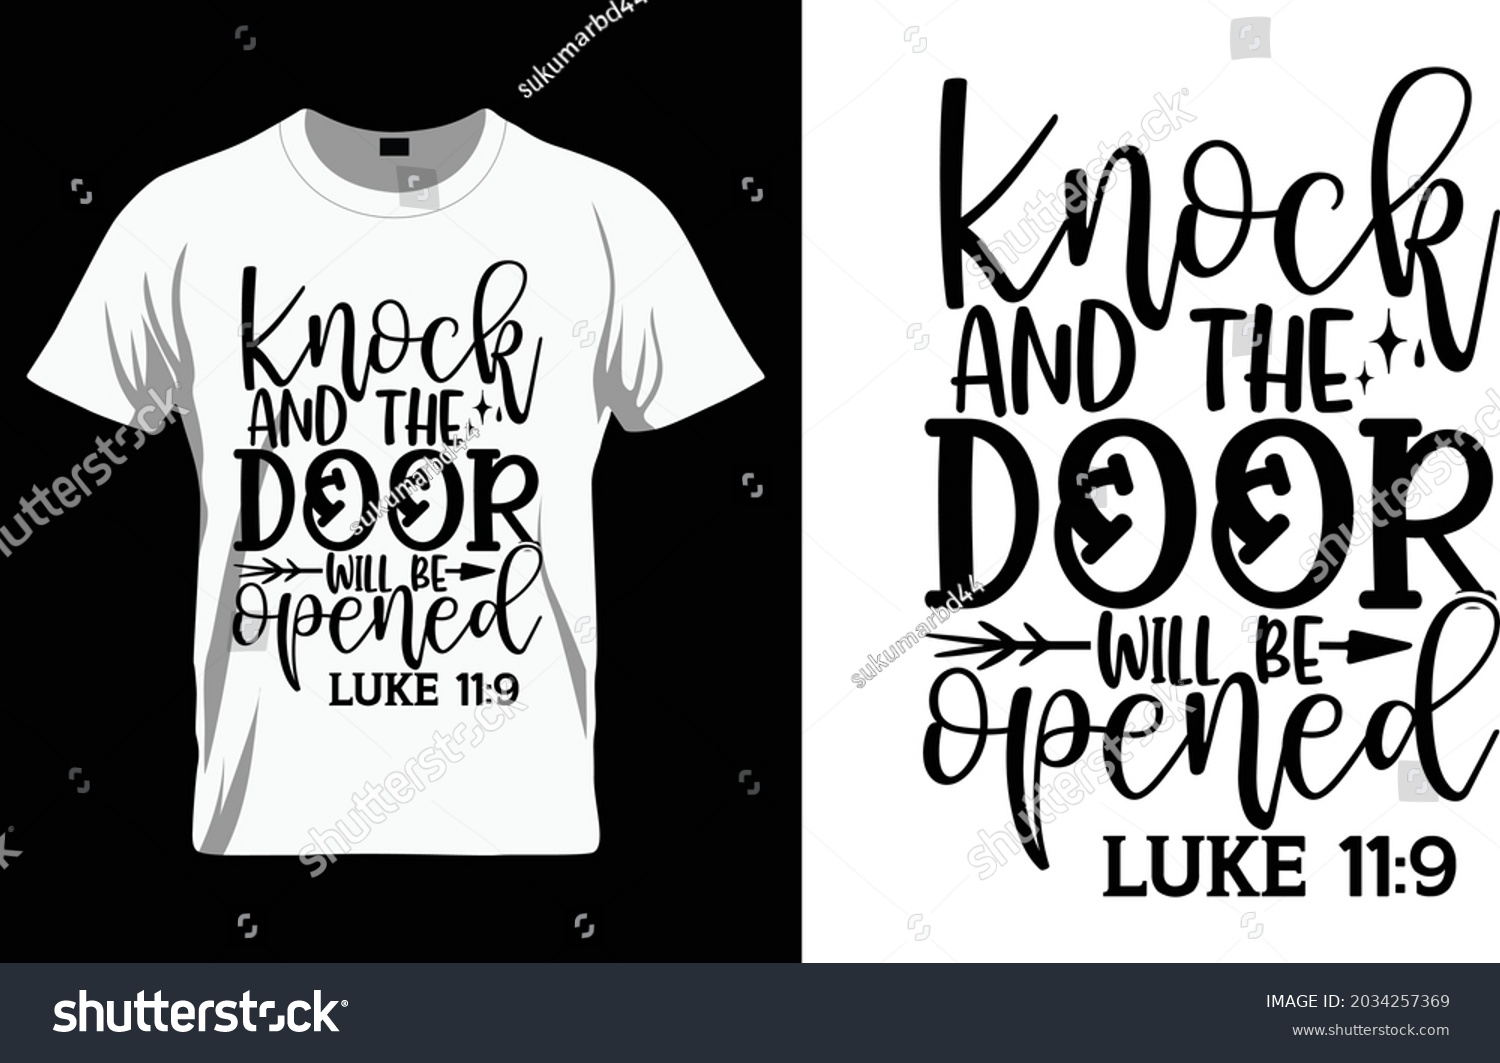 SVG of Knock and the door will be opened like 11:9 - Bible Verse t shirts design, Hand drawn lettering phrase, Calligraphy t shirt design, Isolated on white background, svg Files for Cutting Cricut and Silho svg